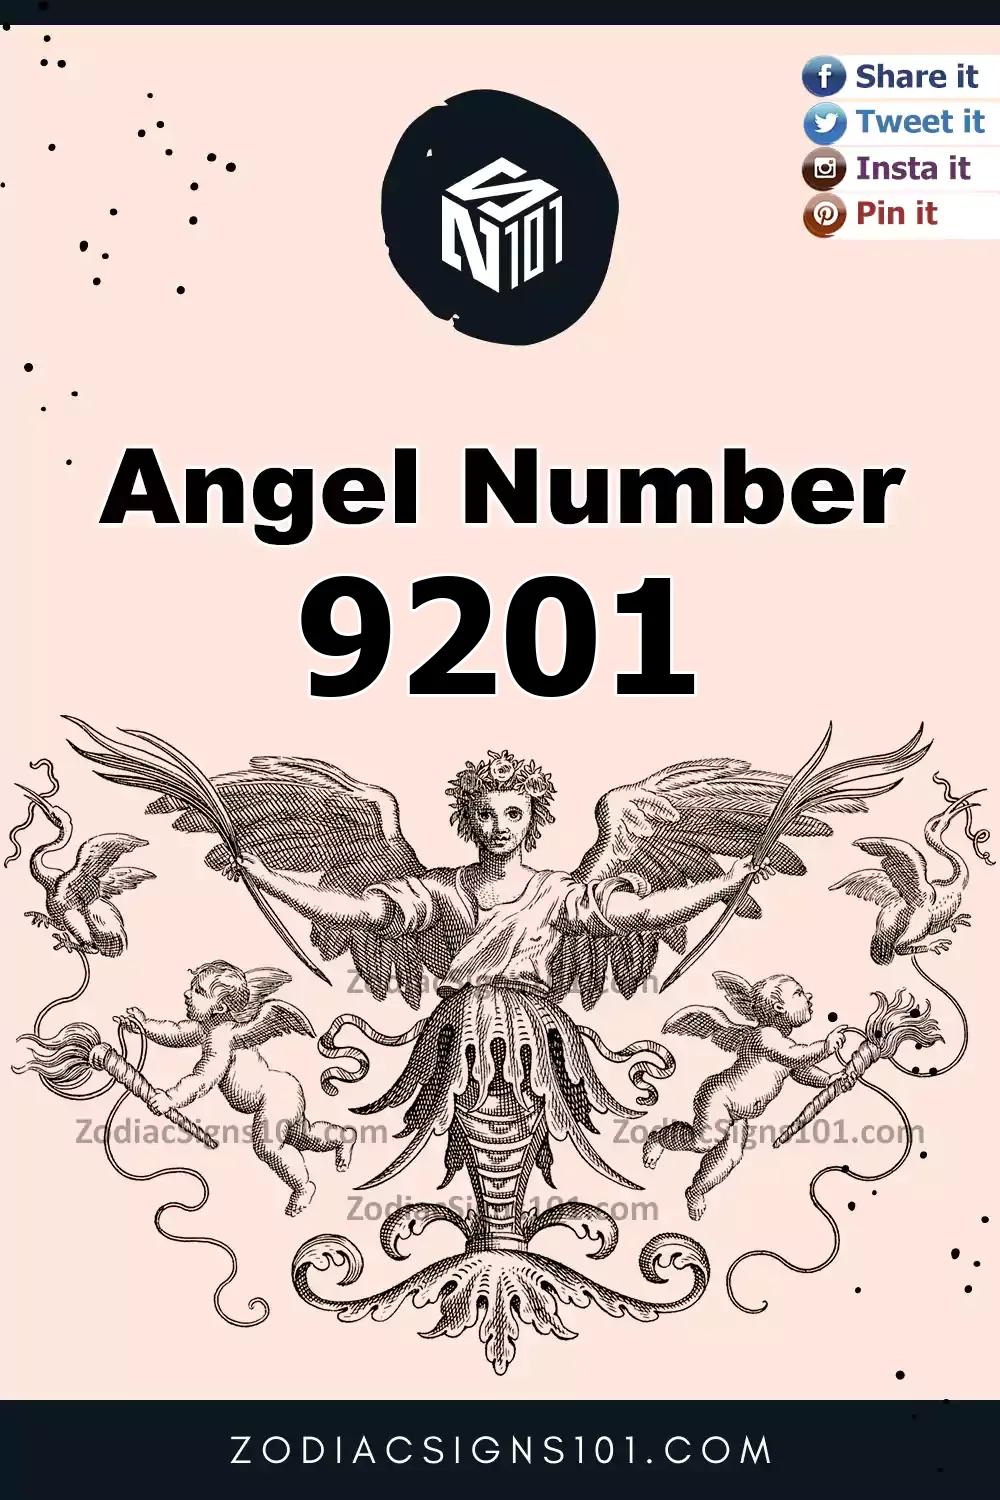 9201 Angel Number Meaning